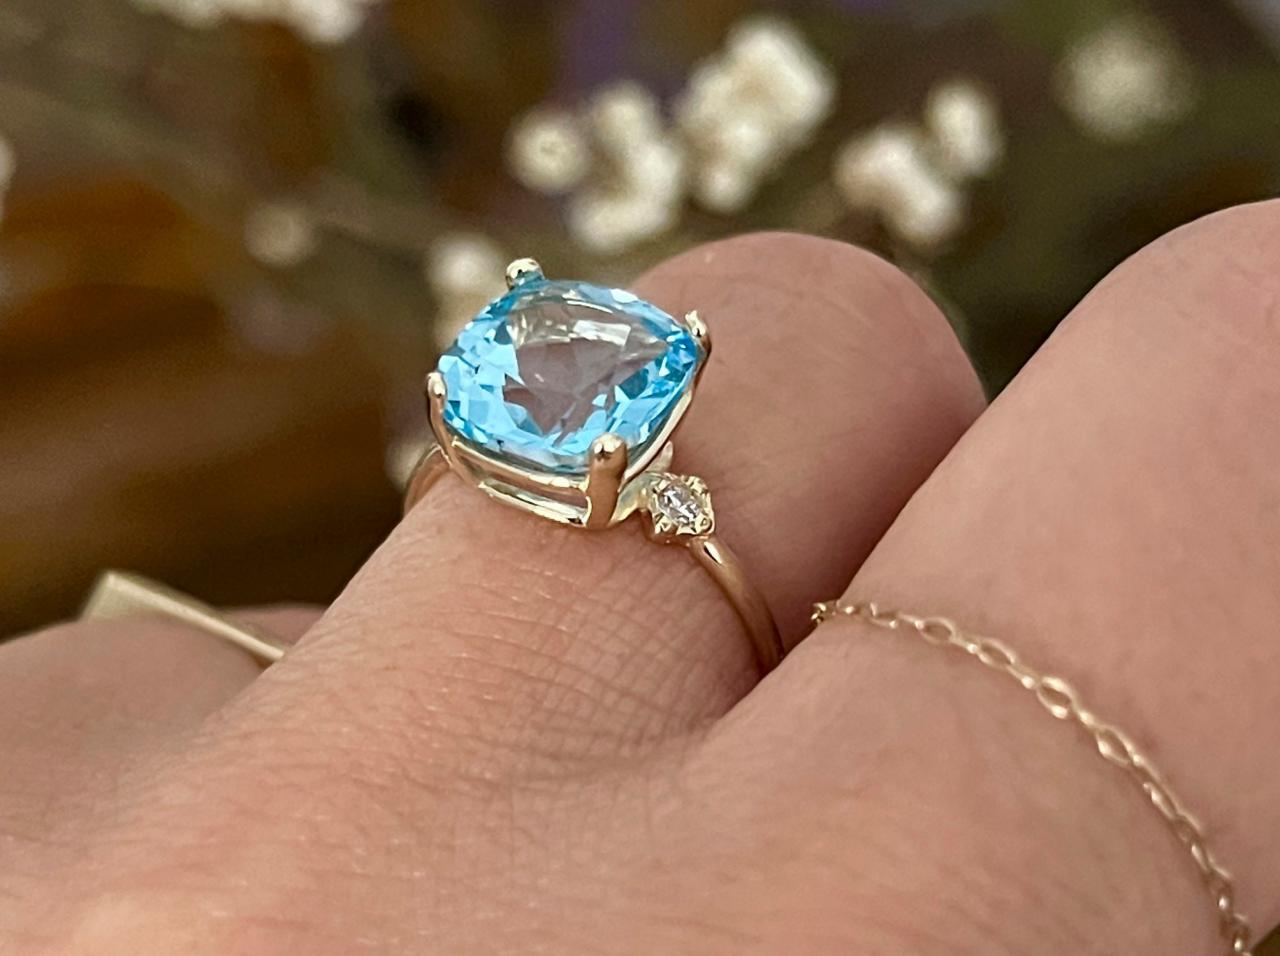 Solid gold engagement ring with cushion blue topaz, natural light blue gemstone and diamond bridal ring, 18k gold art deco solitaire ring